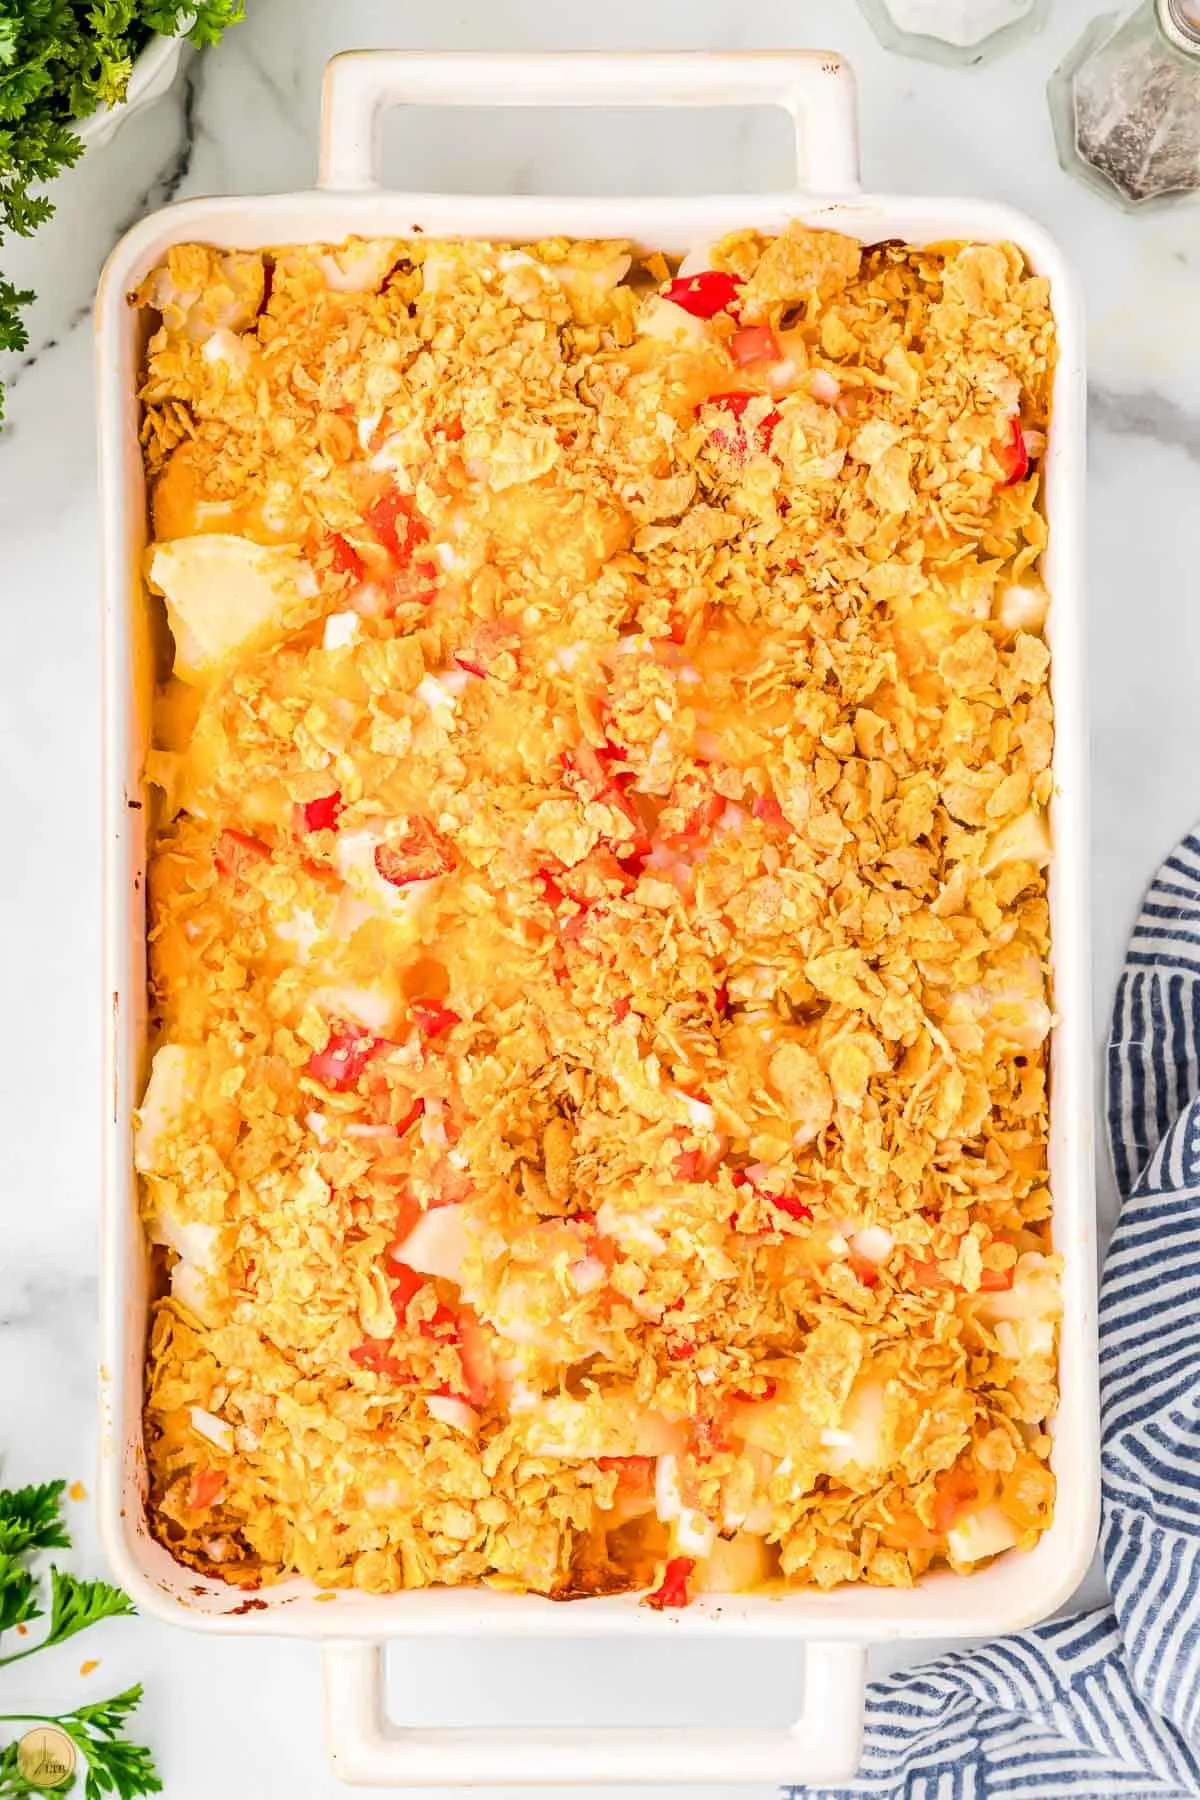 baked casserole in a white baking dish